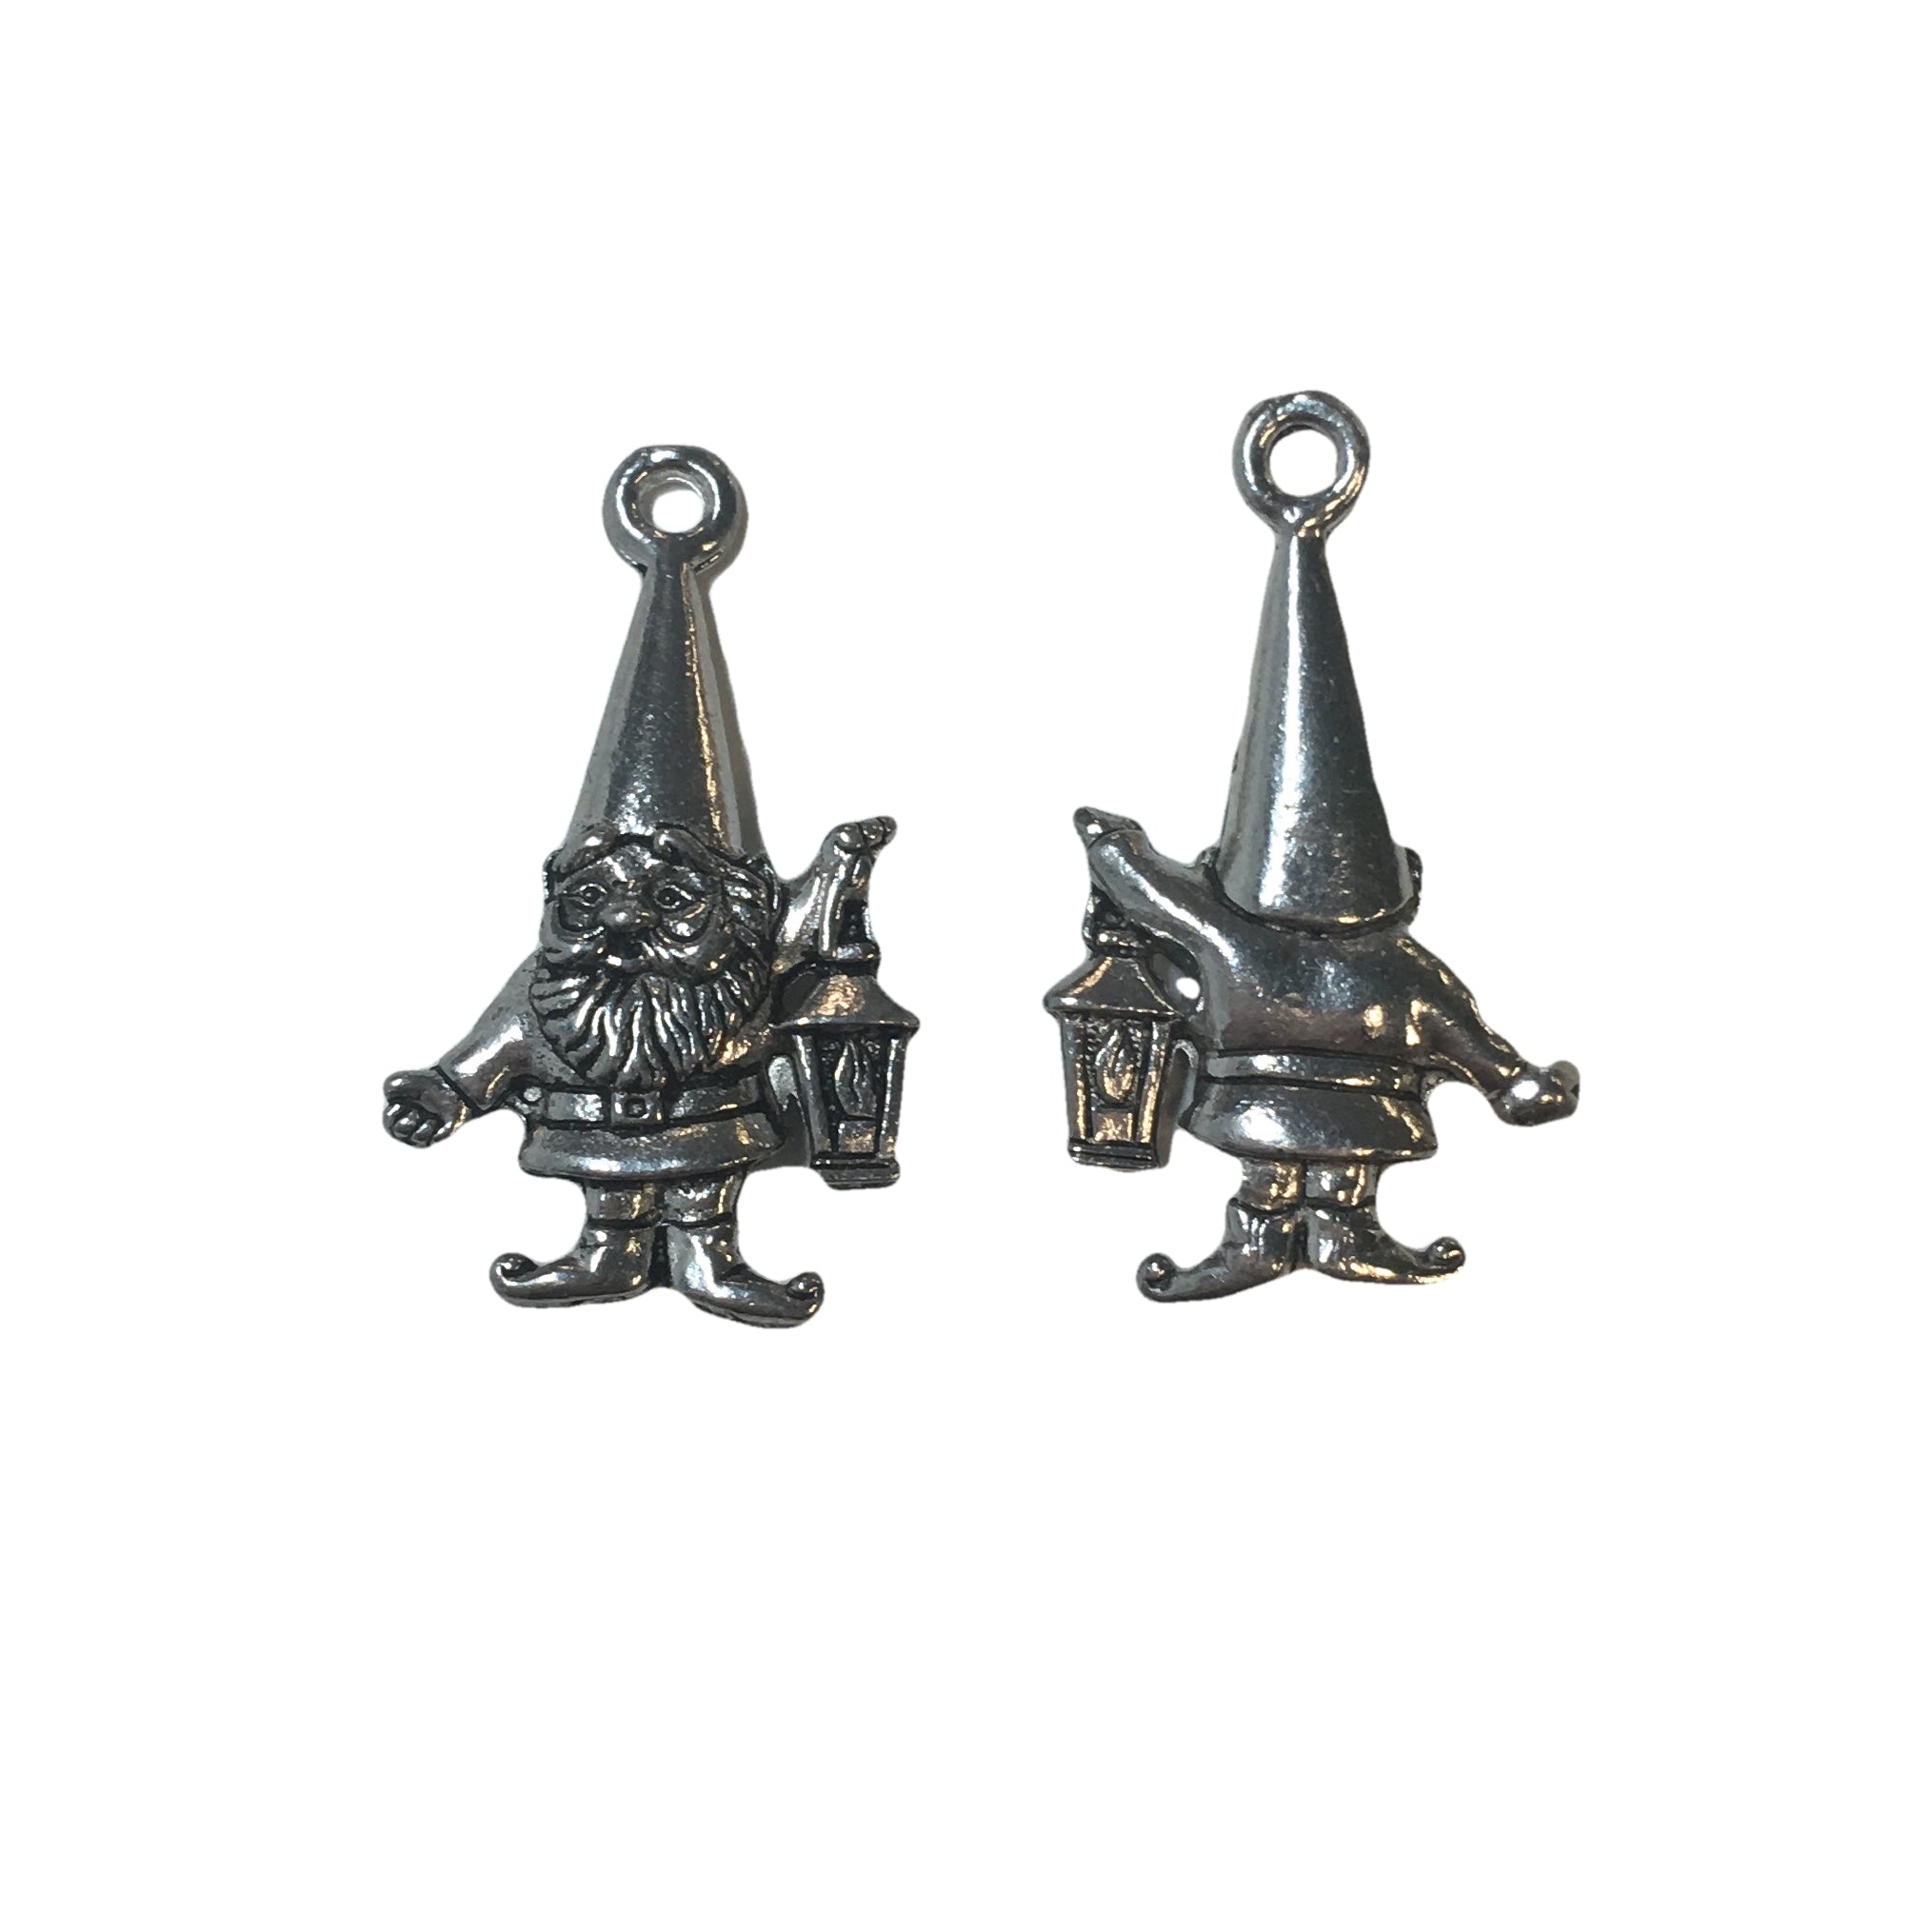 Garden Gnome Charms - Qty of 5 Charms - Lead Free Pewter Silver - American Made